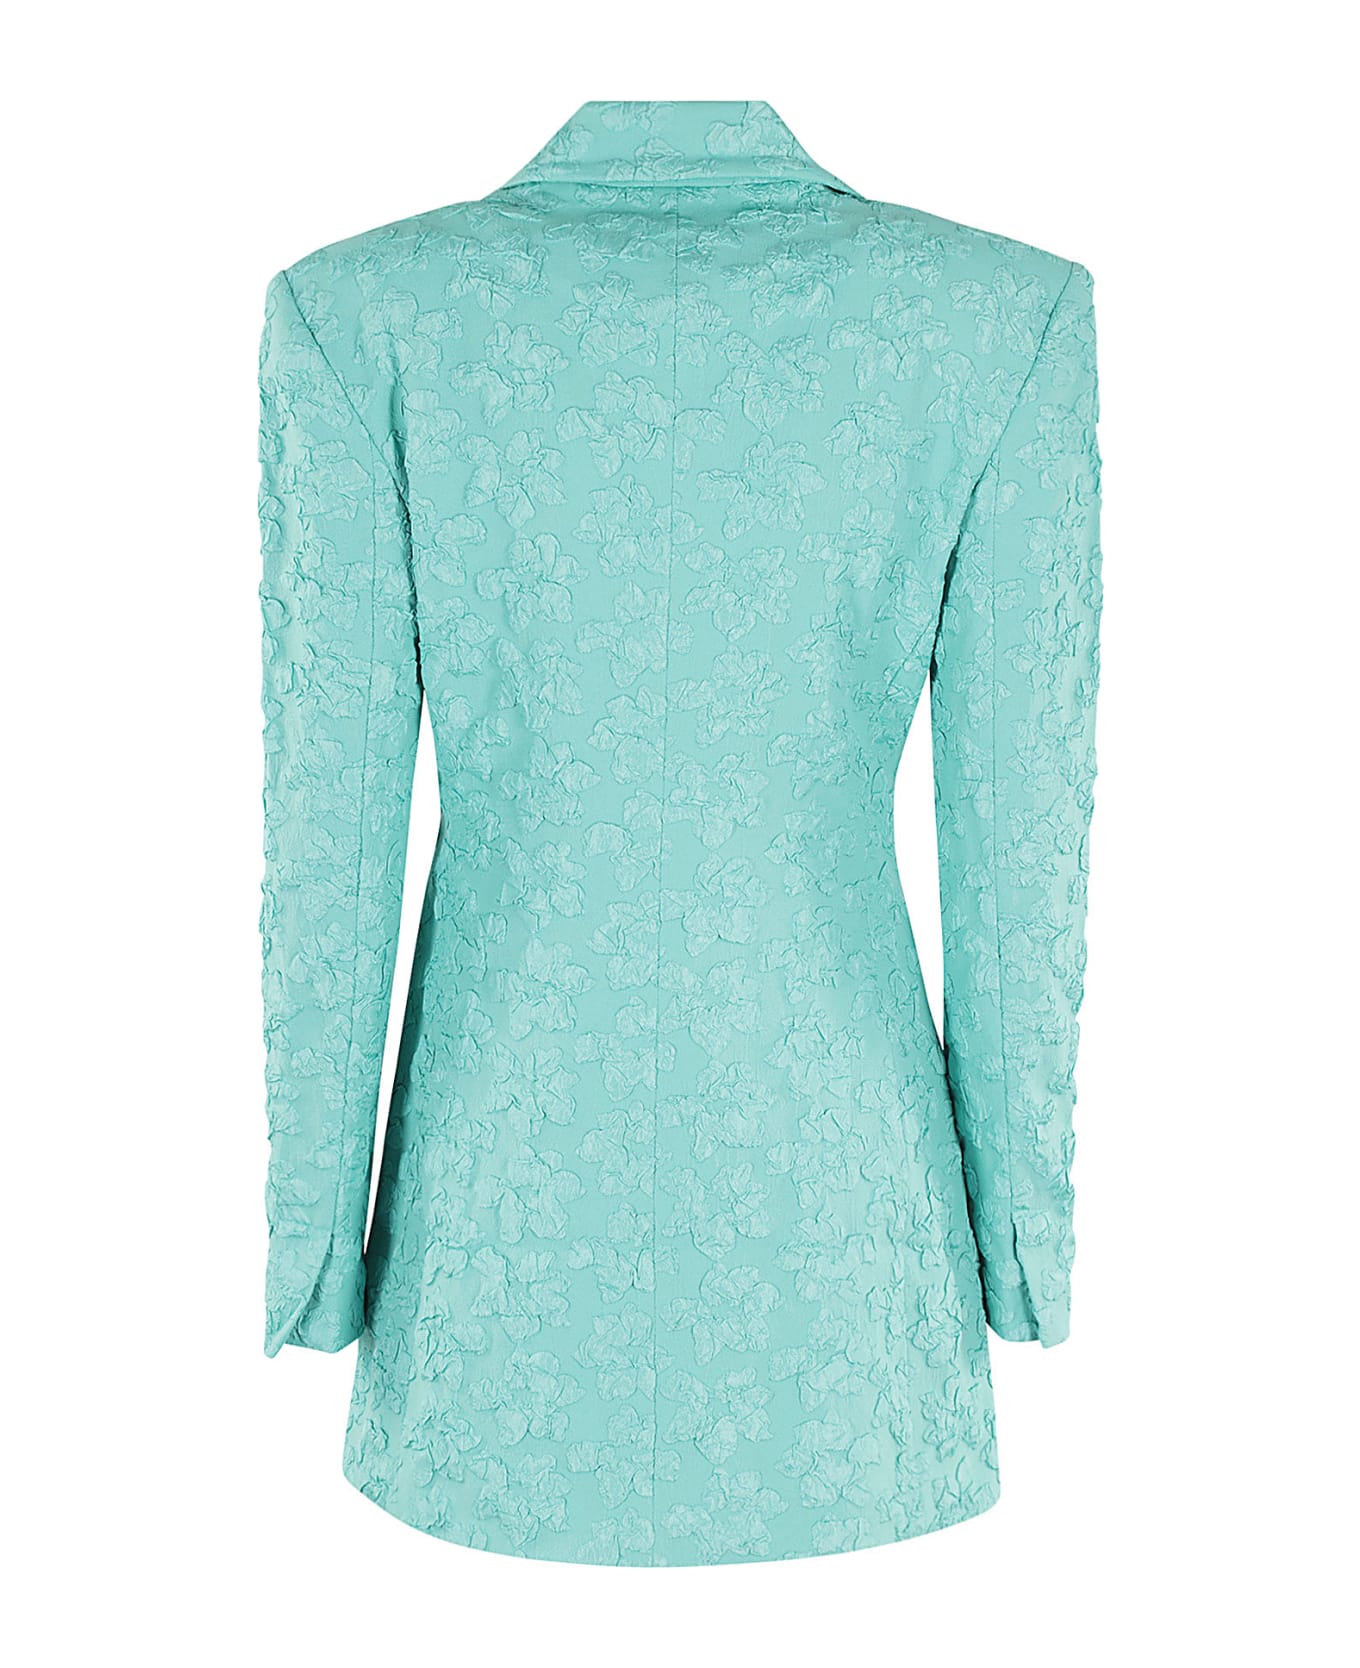 Rotate by Birger Christensen 3d Jacquard - Blue Turquoise  ブレザー